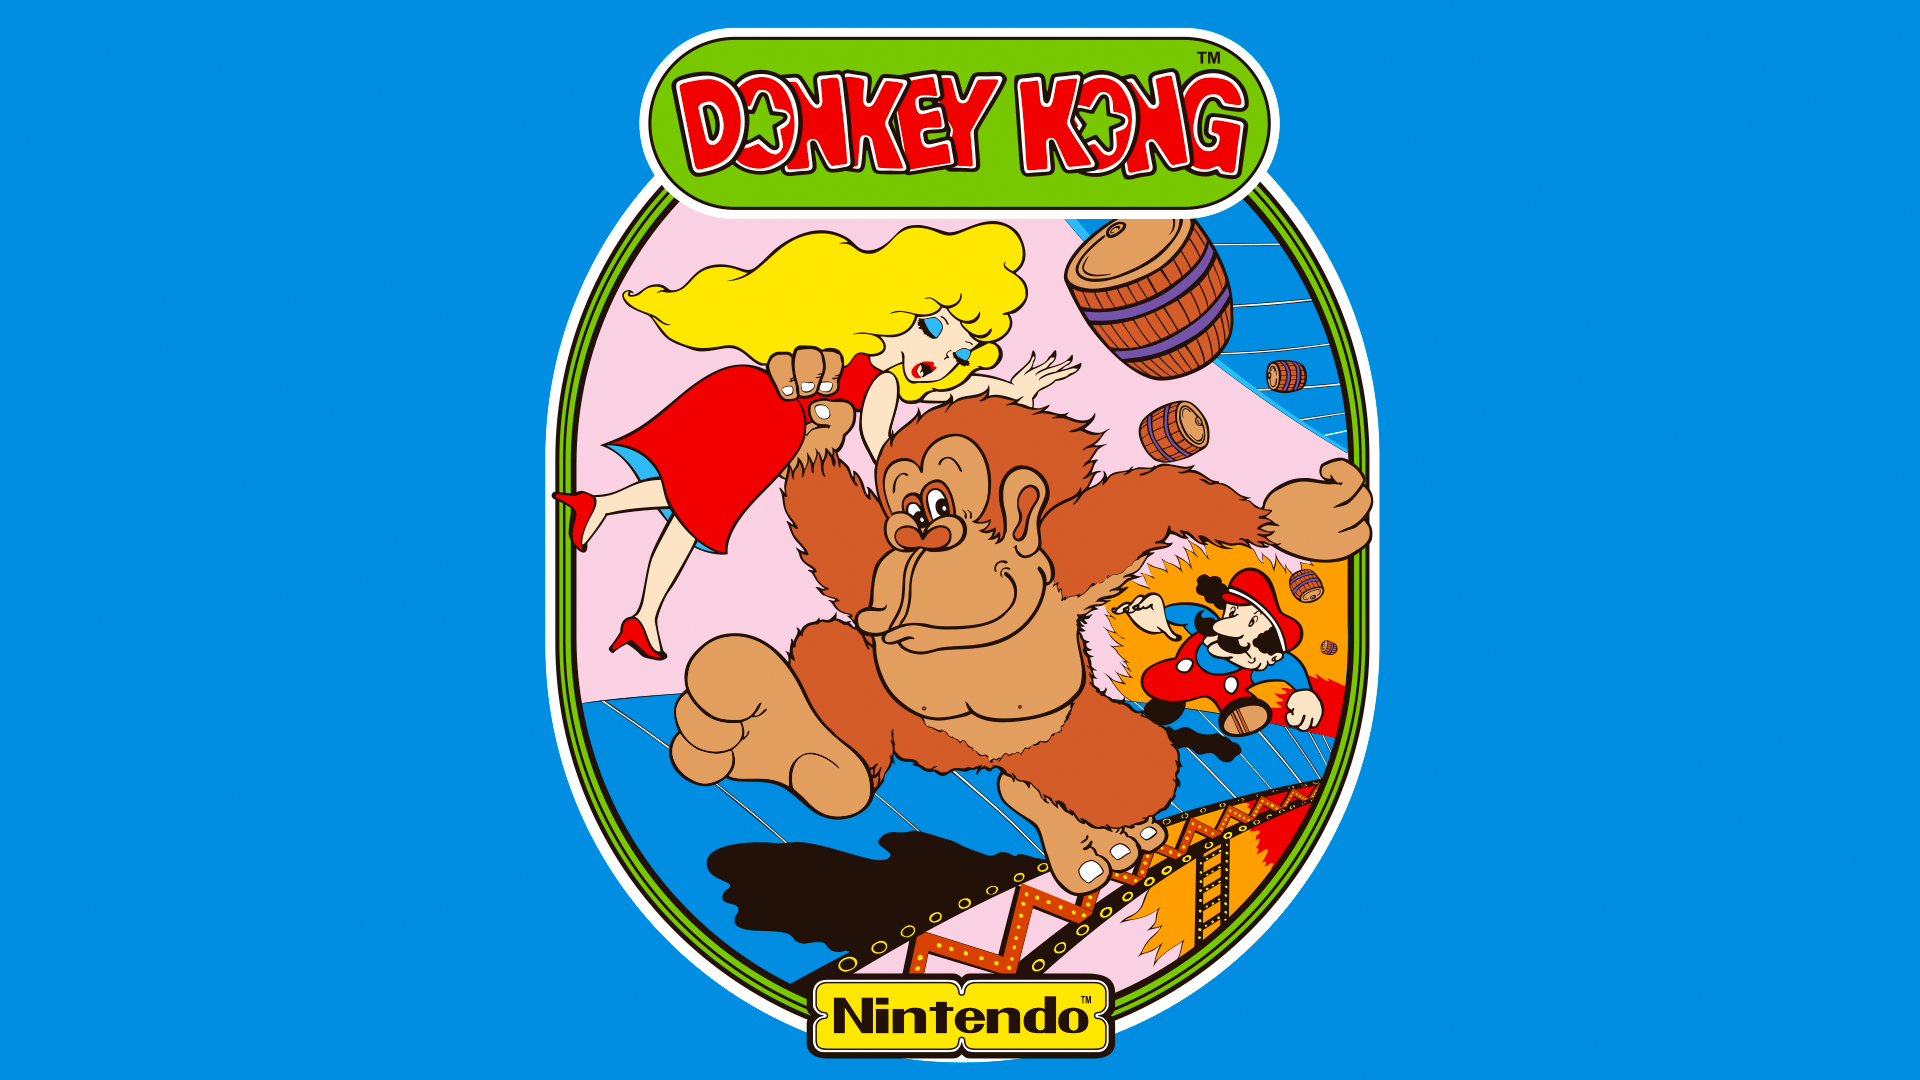 General 1920x1080 video games arcade cabinet Donkey Kong Nintendo video game characters Mario (Character)